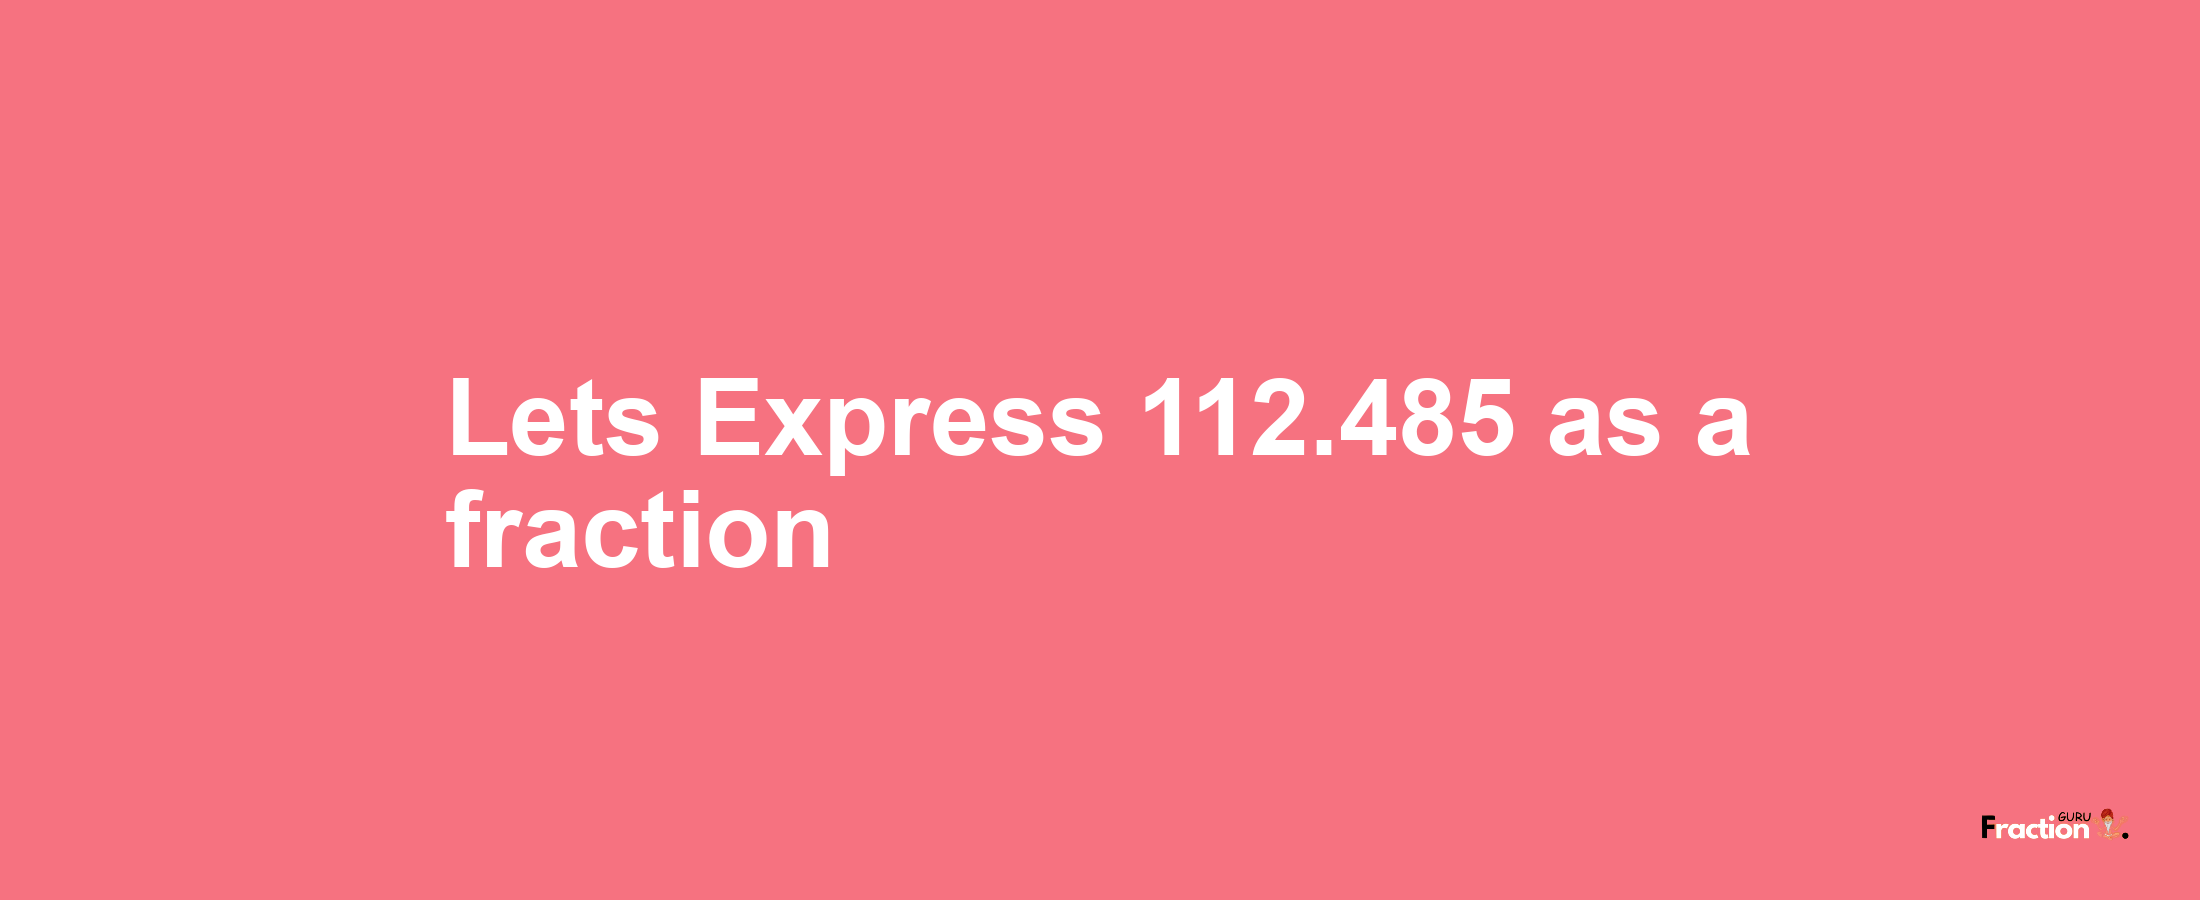 Lets Express 112.485 as afraction